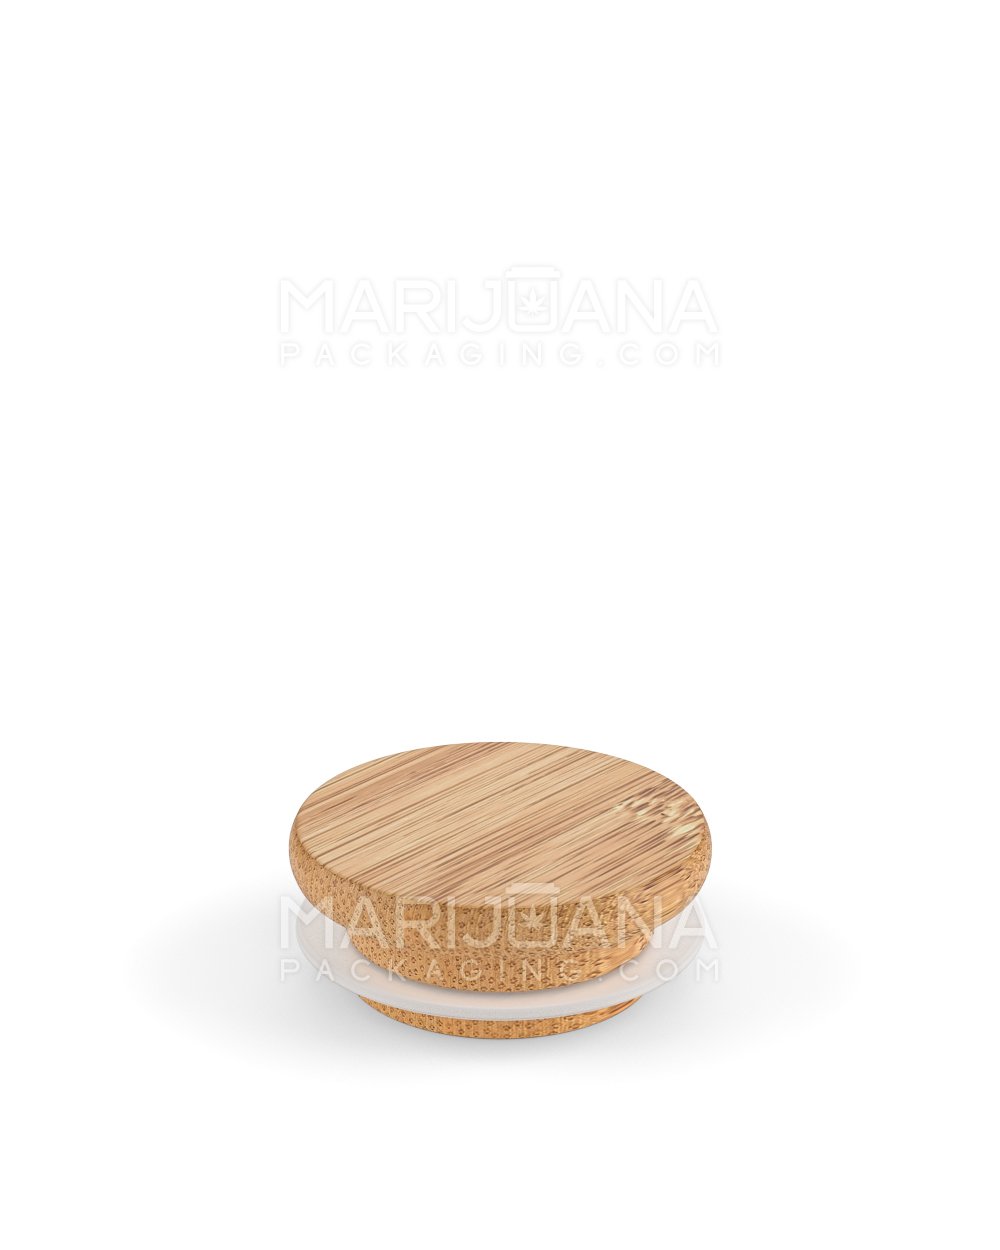 Glass Jar with Wooden Lid | 2oz - 16 Dram - 200 Count - 10